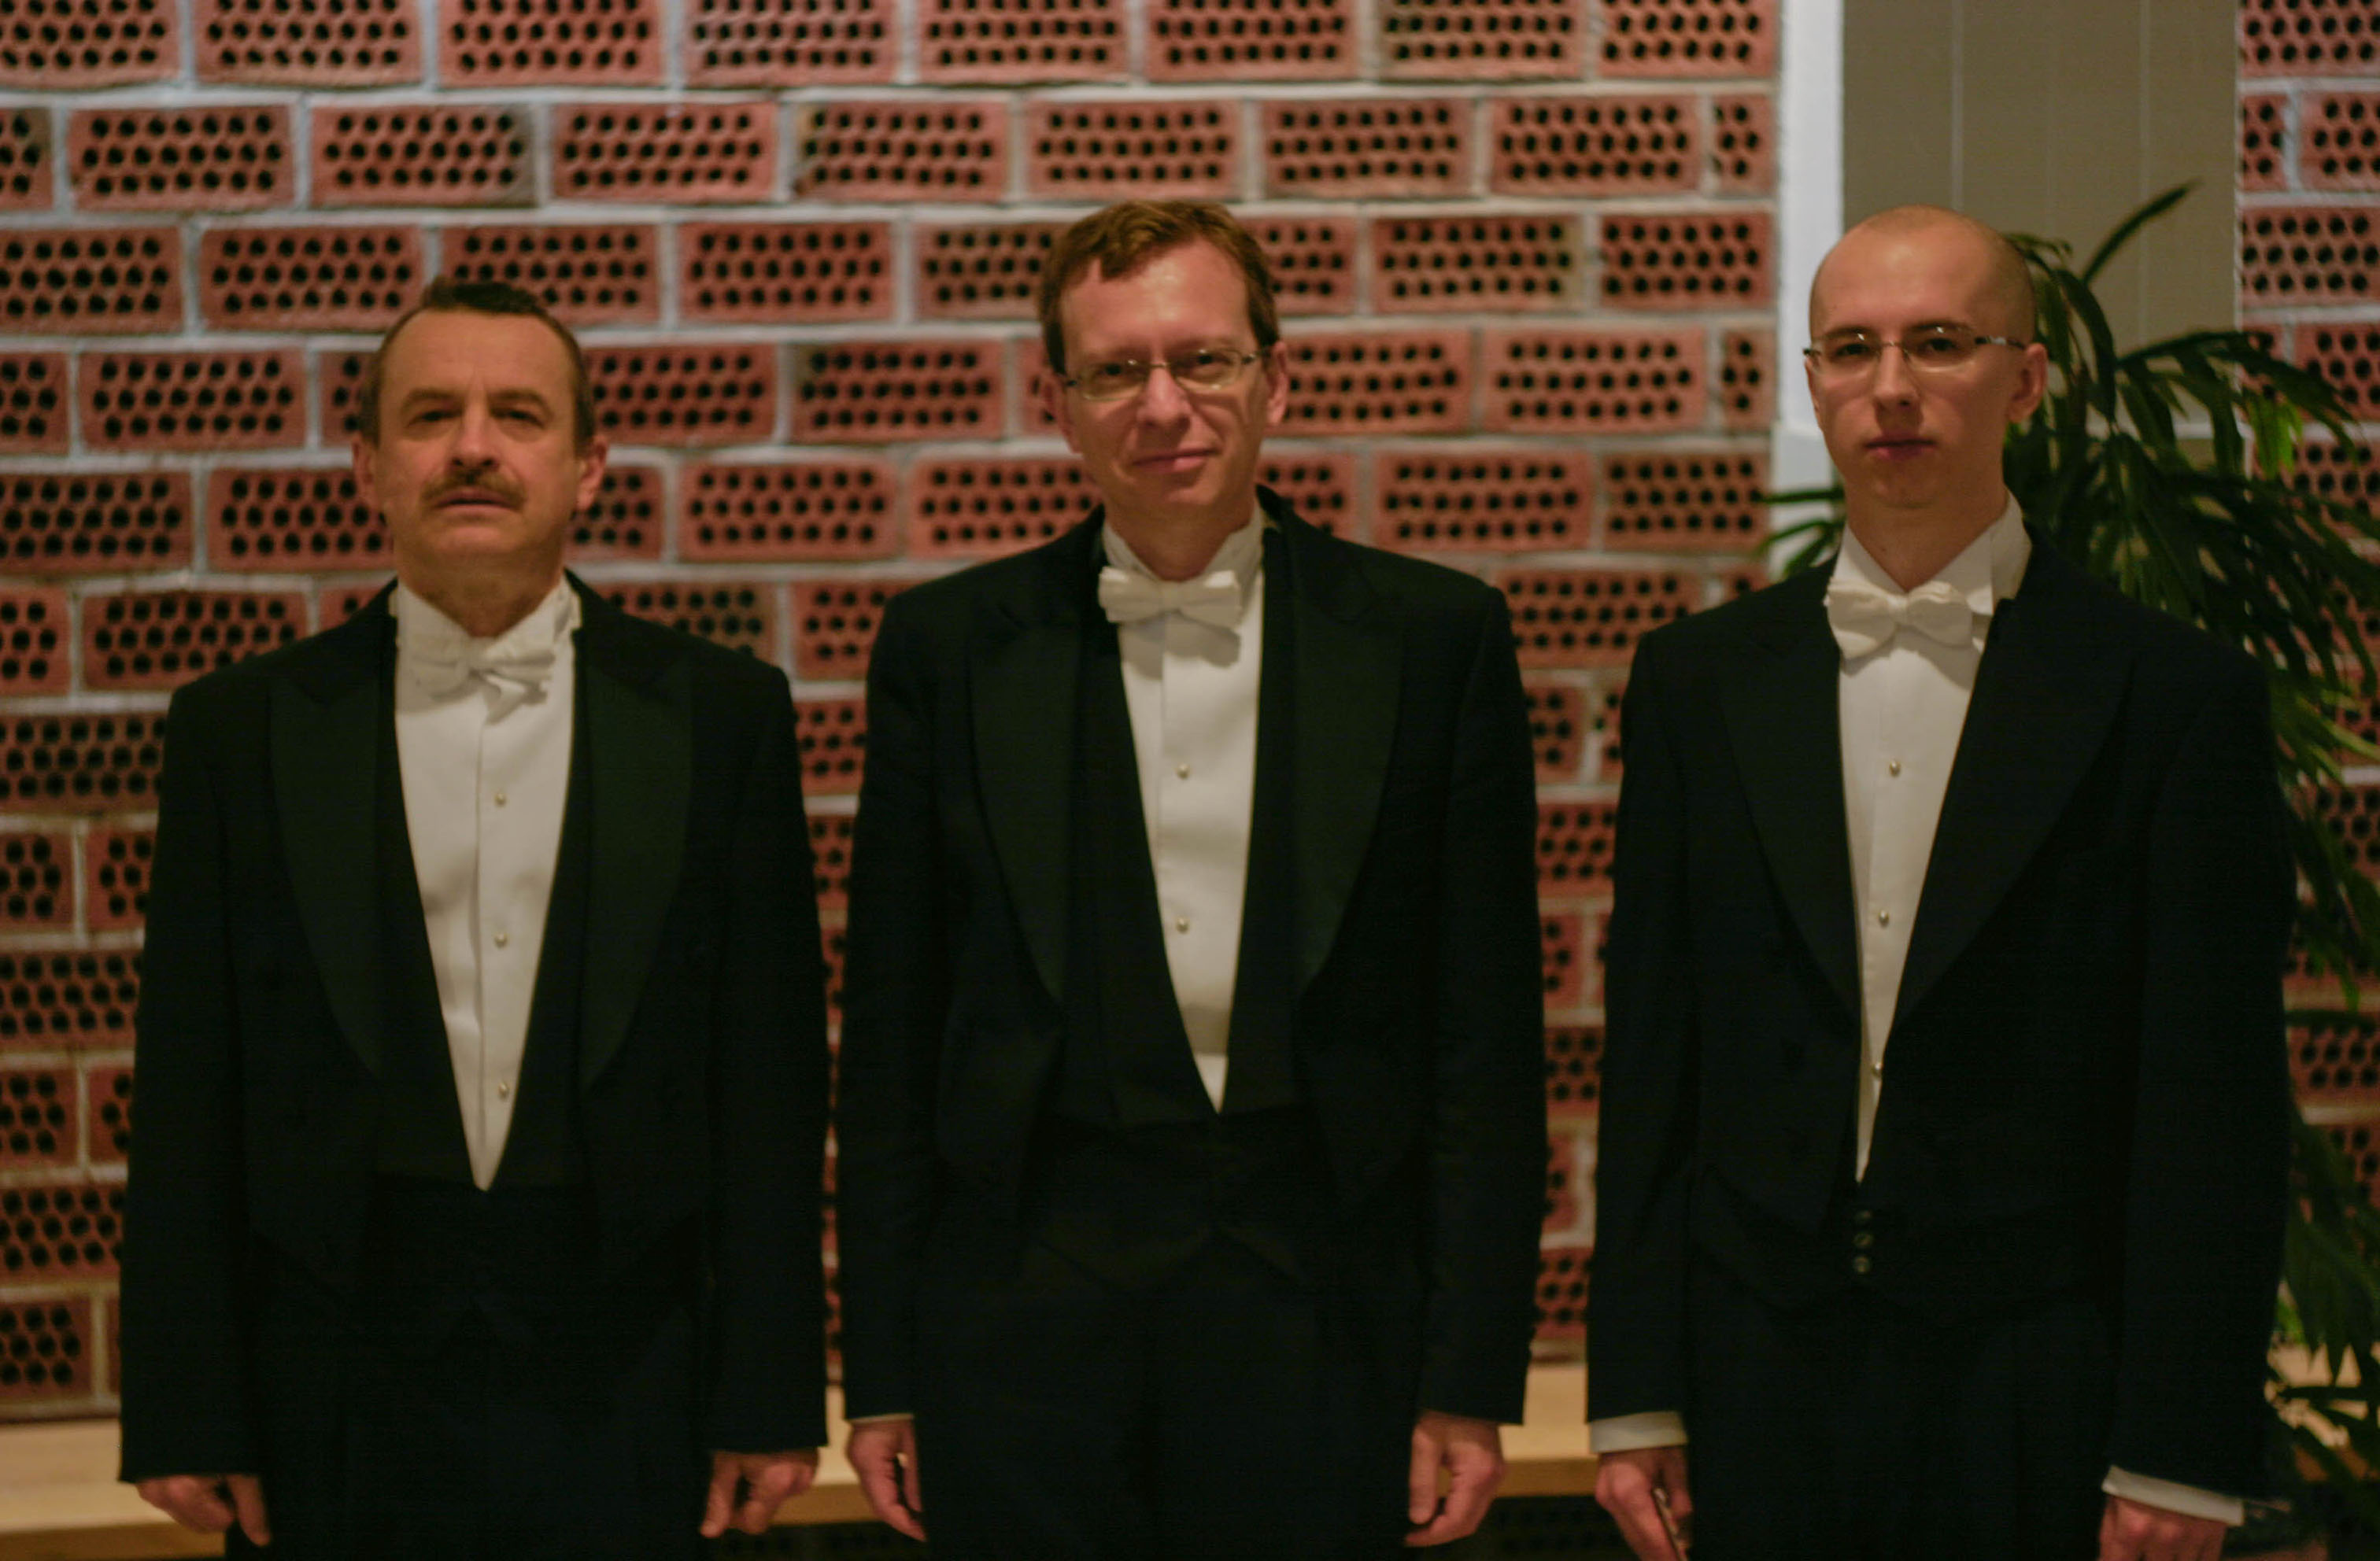 From left to right: Prof. Constantin Simovski, Dimitry Morits, and Prof. Gennady Shvets.